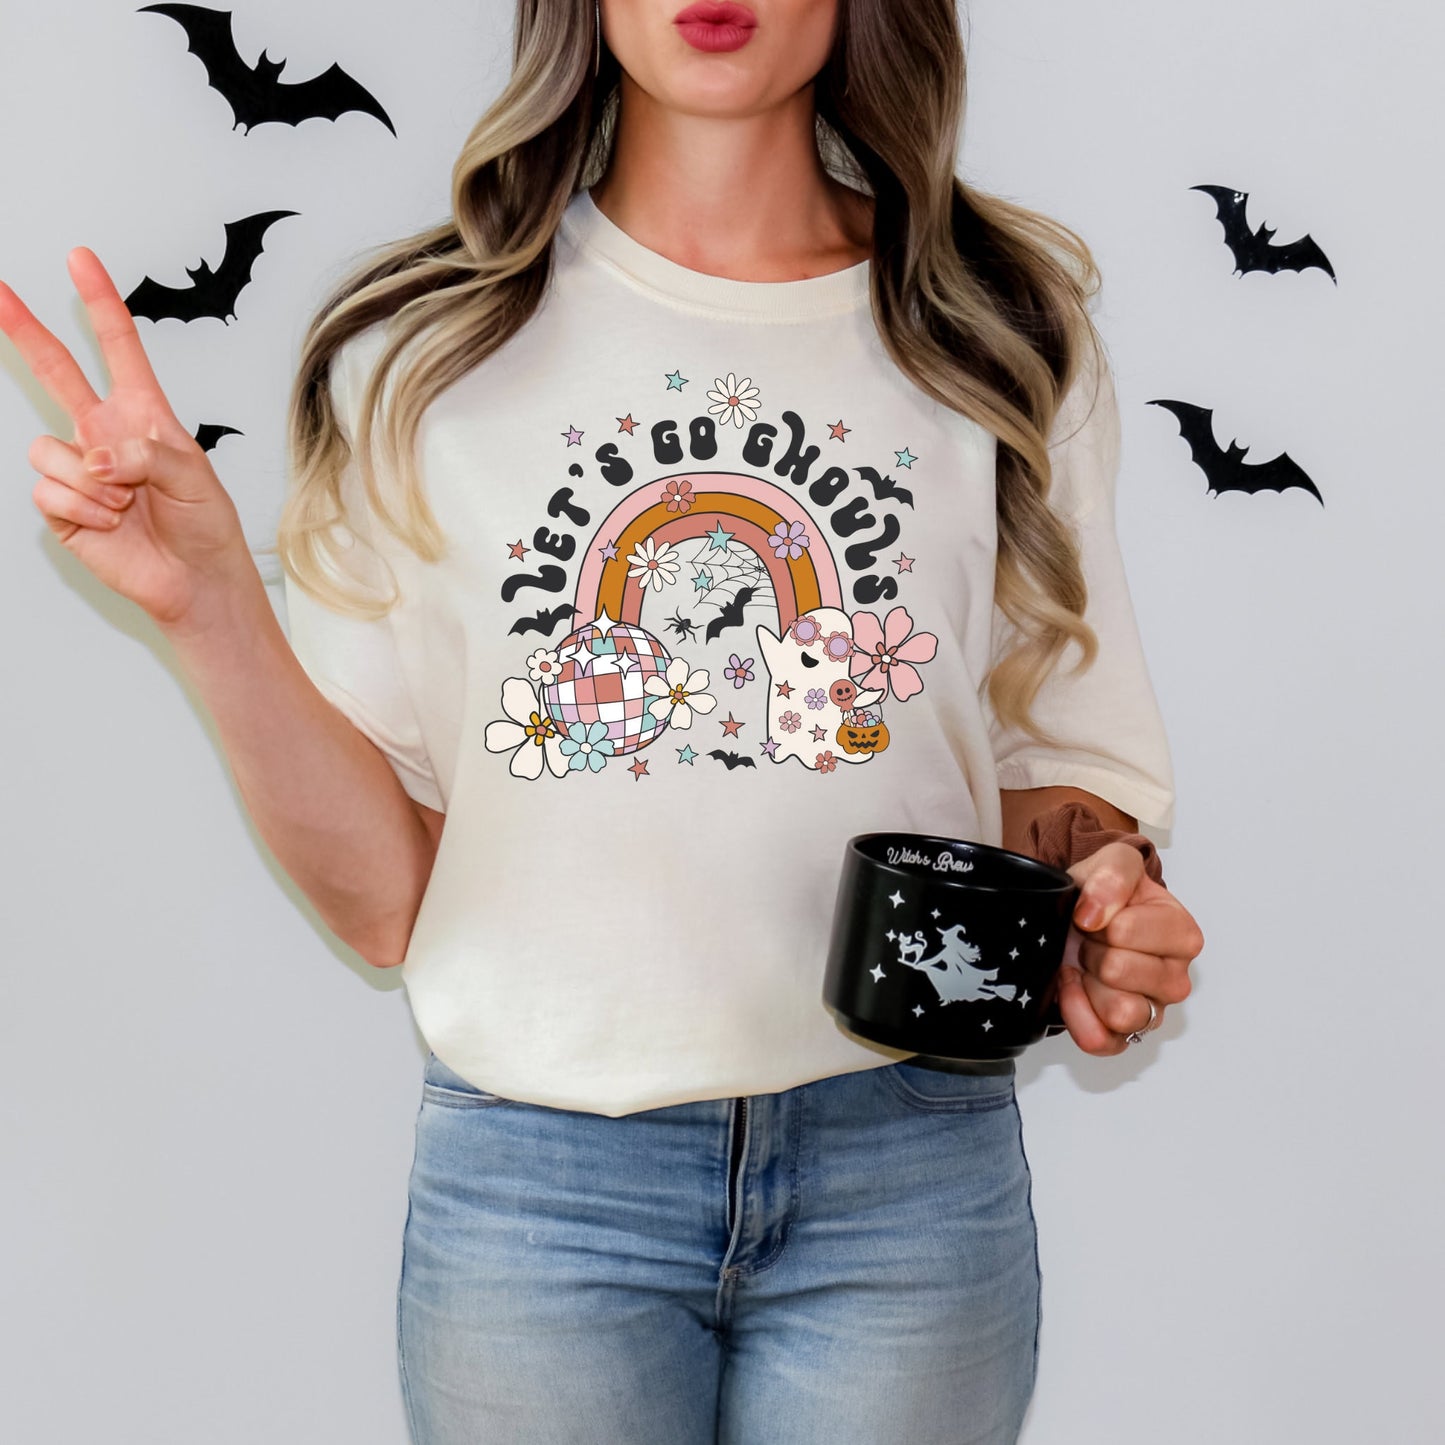 Let’s Go Ghouls Matching Shirt, Mommy and Me Halloween Shirts, Toddler Halloween Shirt, Comfort Colors Halloween Tshirt